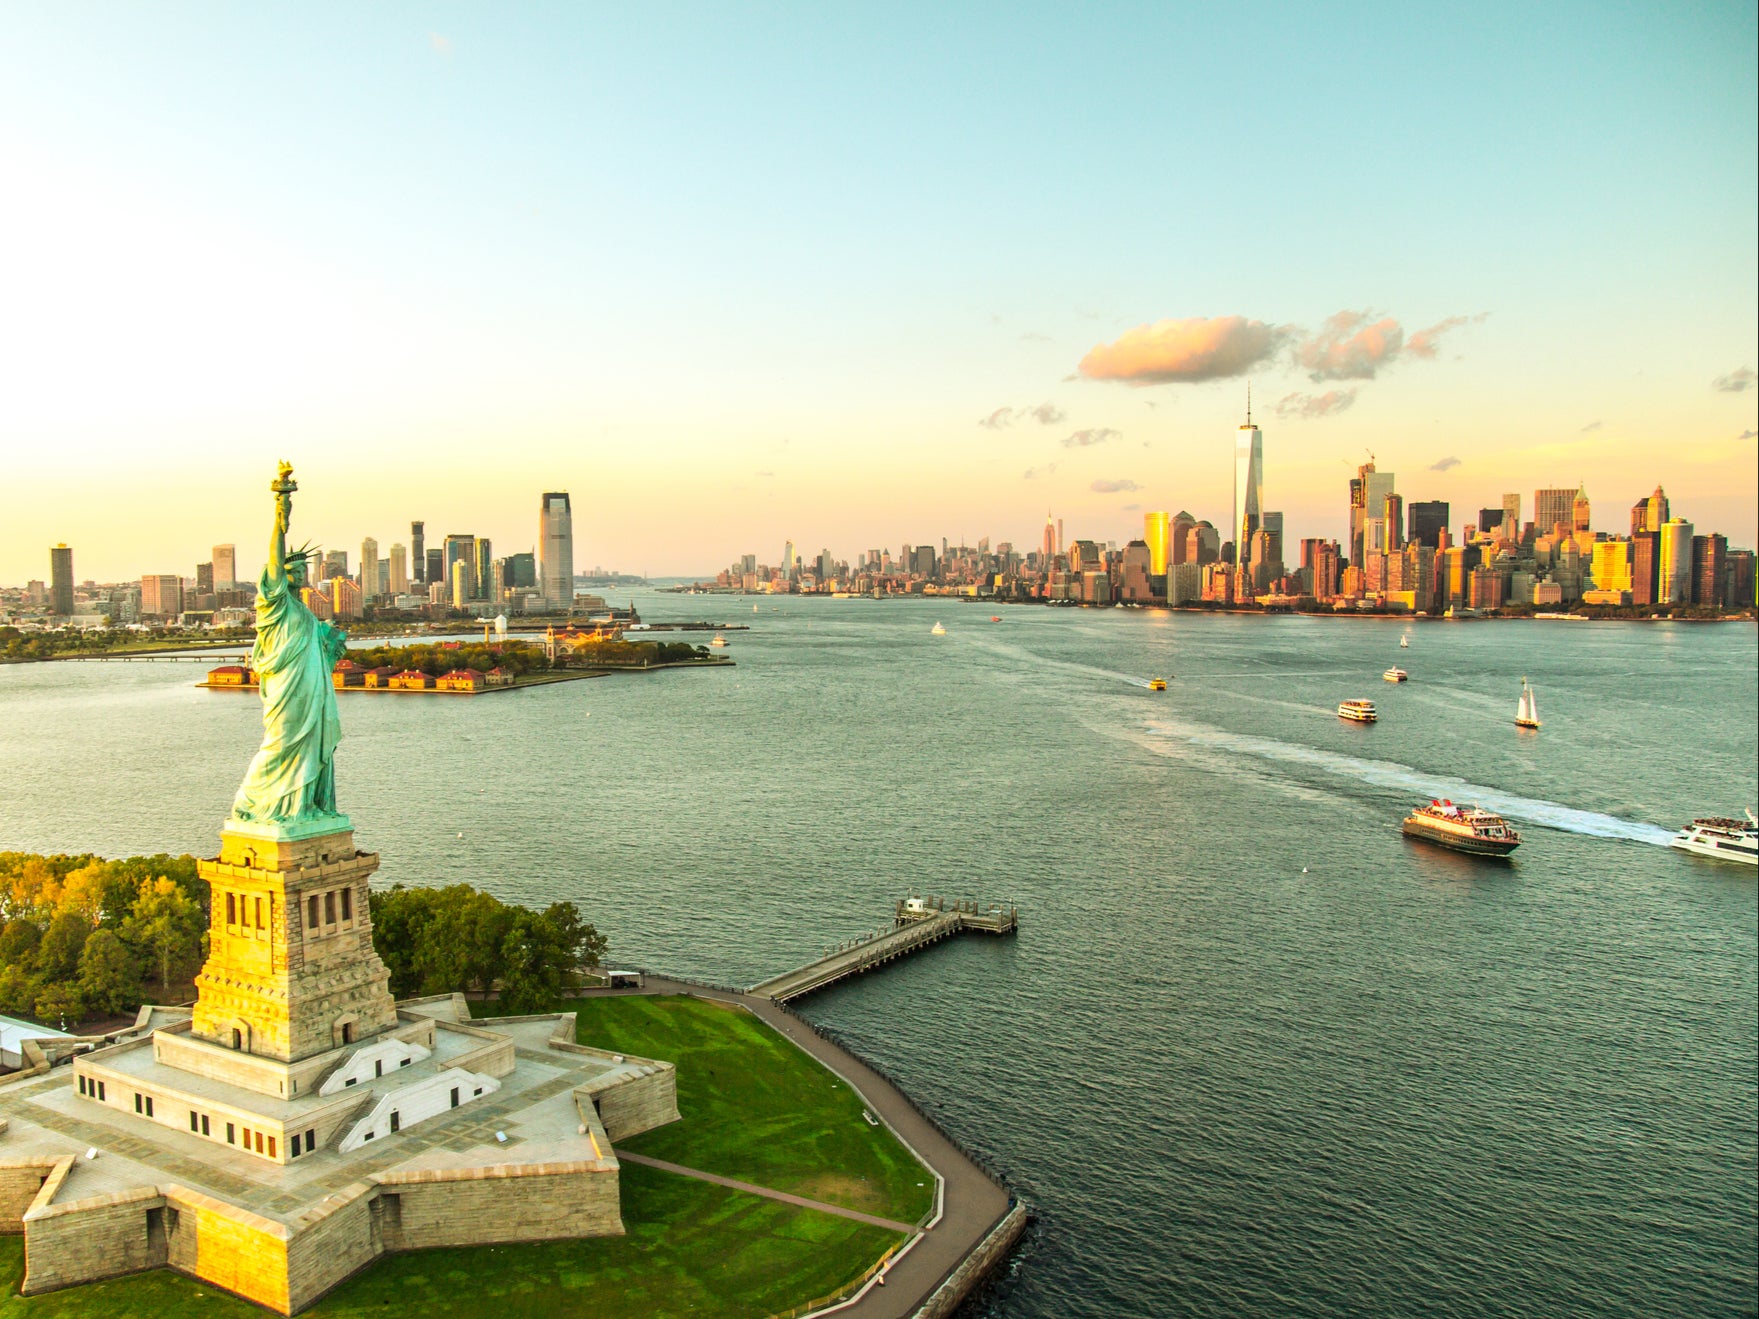 The Statue of Liberty, Empire State Building and Central Park are all popular attractions